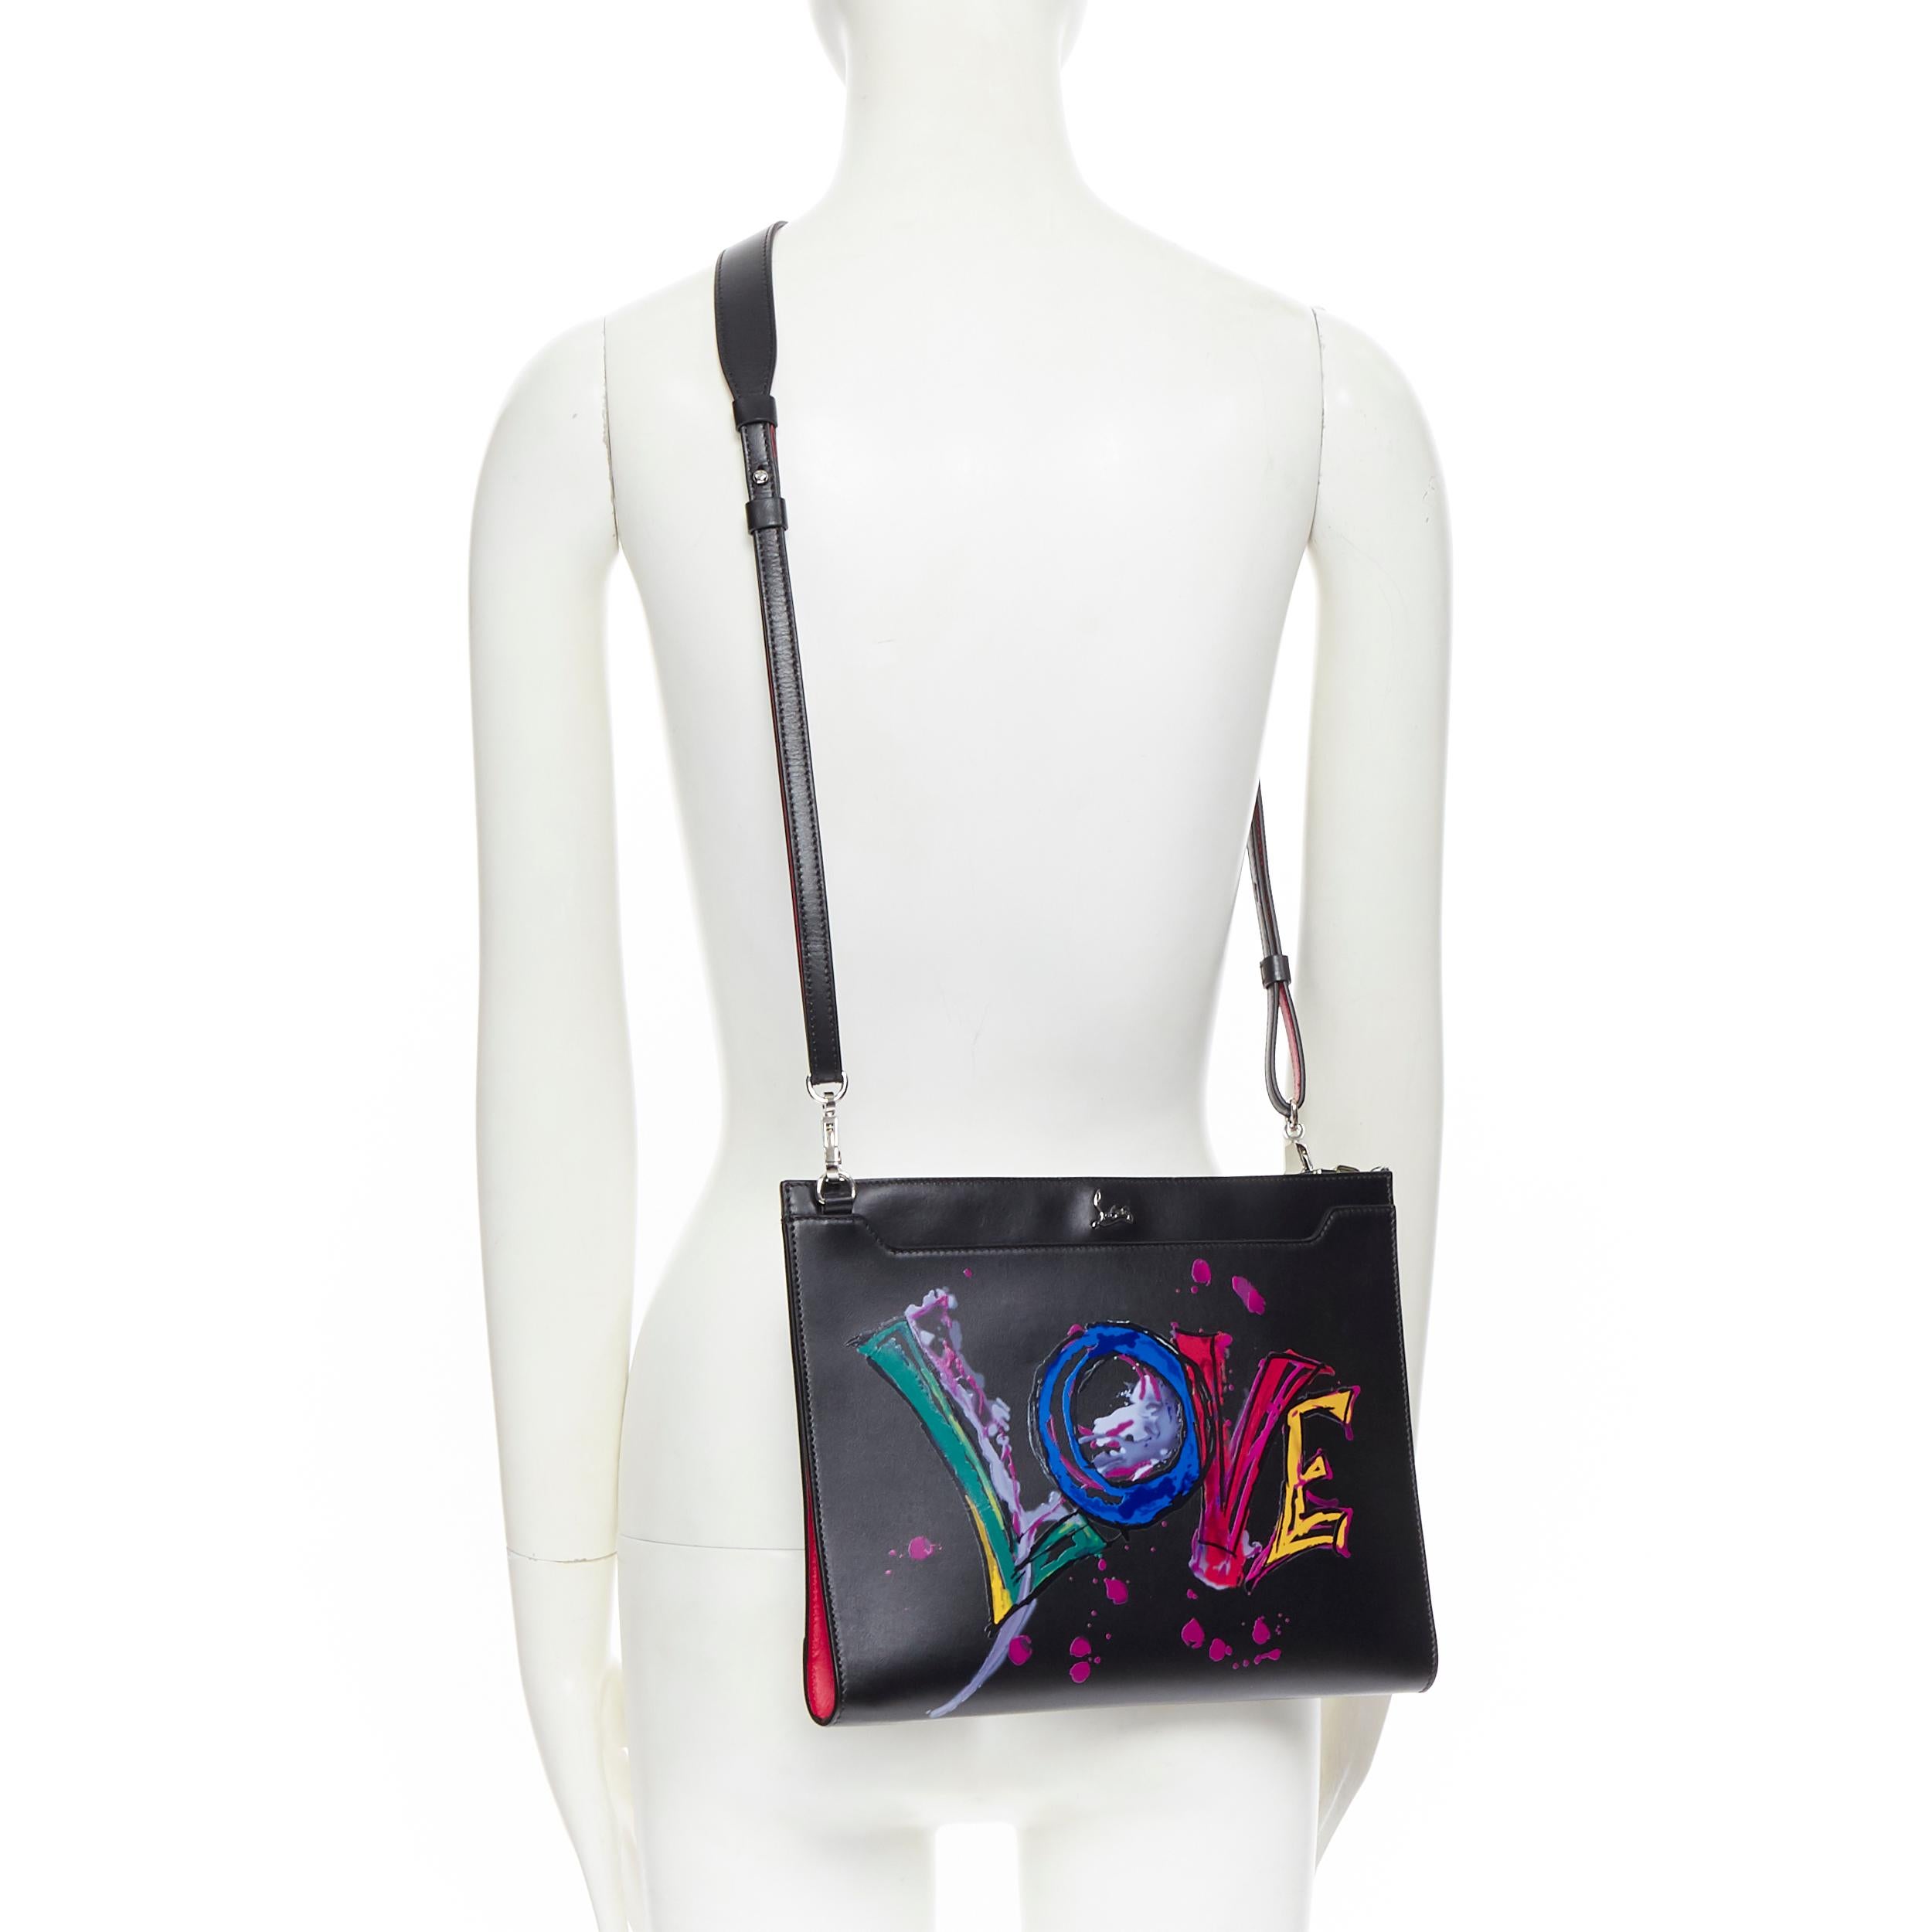 new CHRISTIAN LOUBOUTIN Skypouch Love print black leather crossbody clutch bag
Brand: Christian Louboutin
Designer: Christian Louboutin
Model Name / Style: Skypouch
Material: Leather
Color: Black
Pattern: Abstract
Extra Detail: Black calf leather